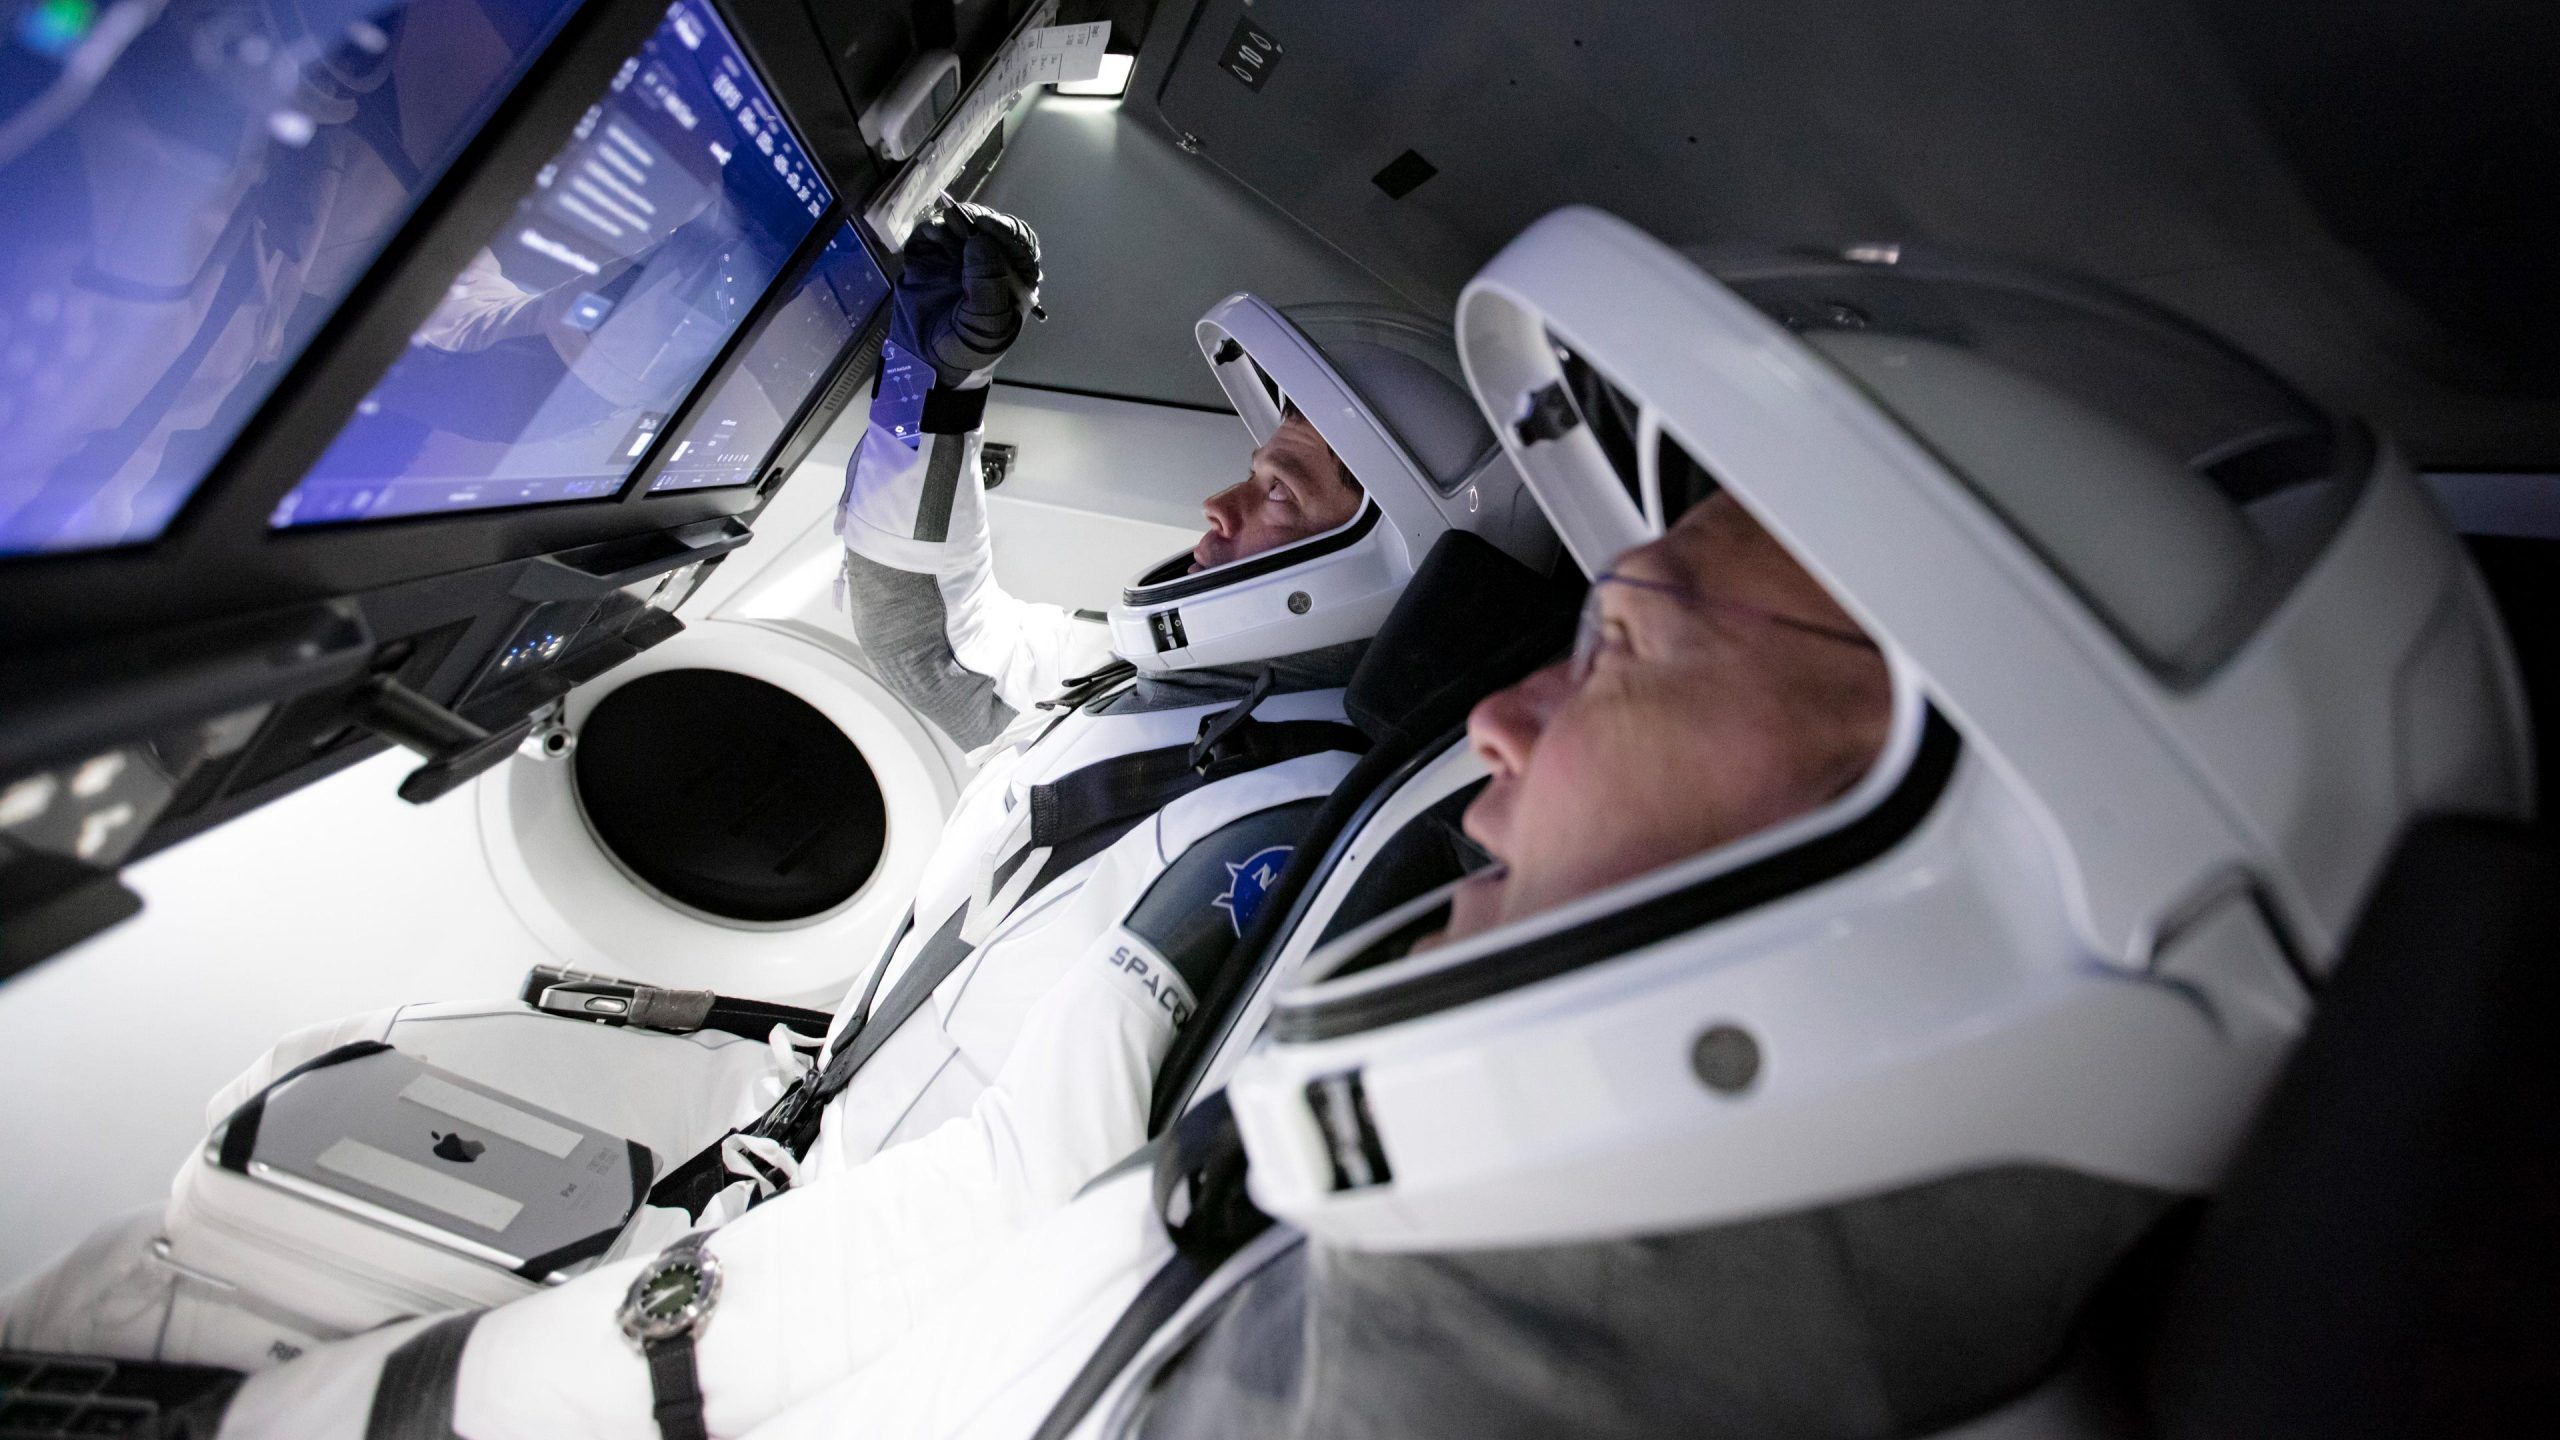 NASA Astronauts Train to Fly the SpaceX Crew Dragon Spacecraft